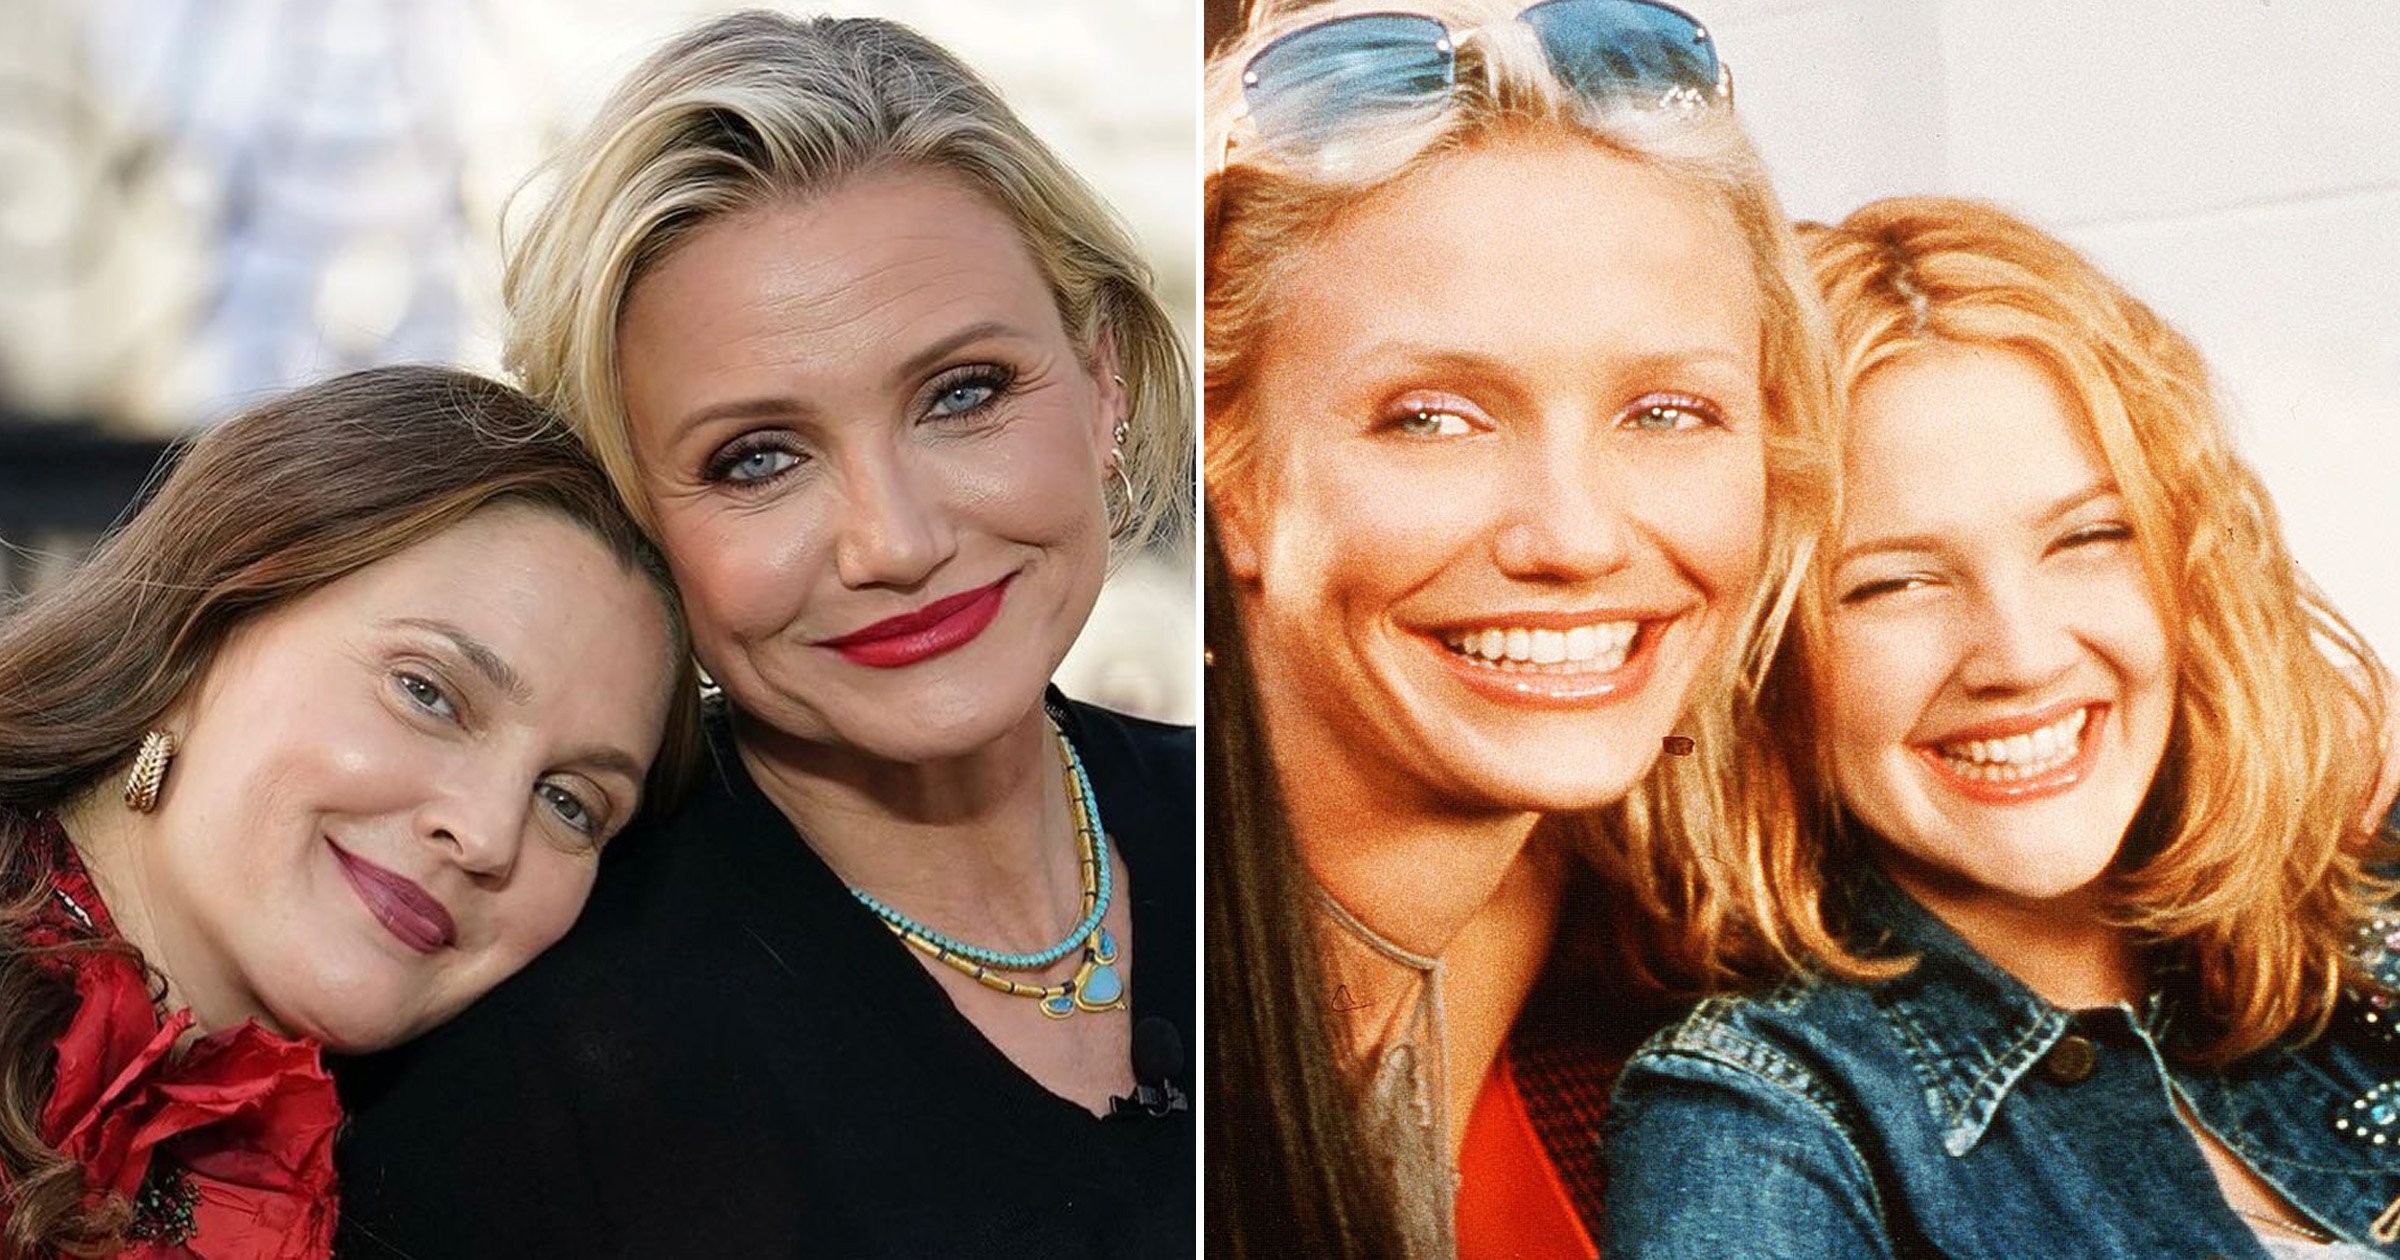 Cameron Diaz And Drew Barrymore Hollywood A listers Reunite in latest Photos!